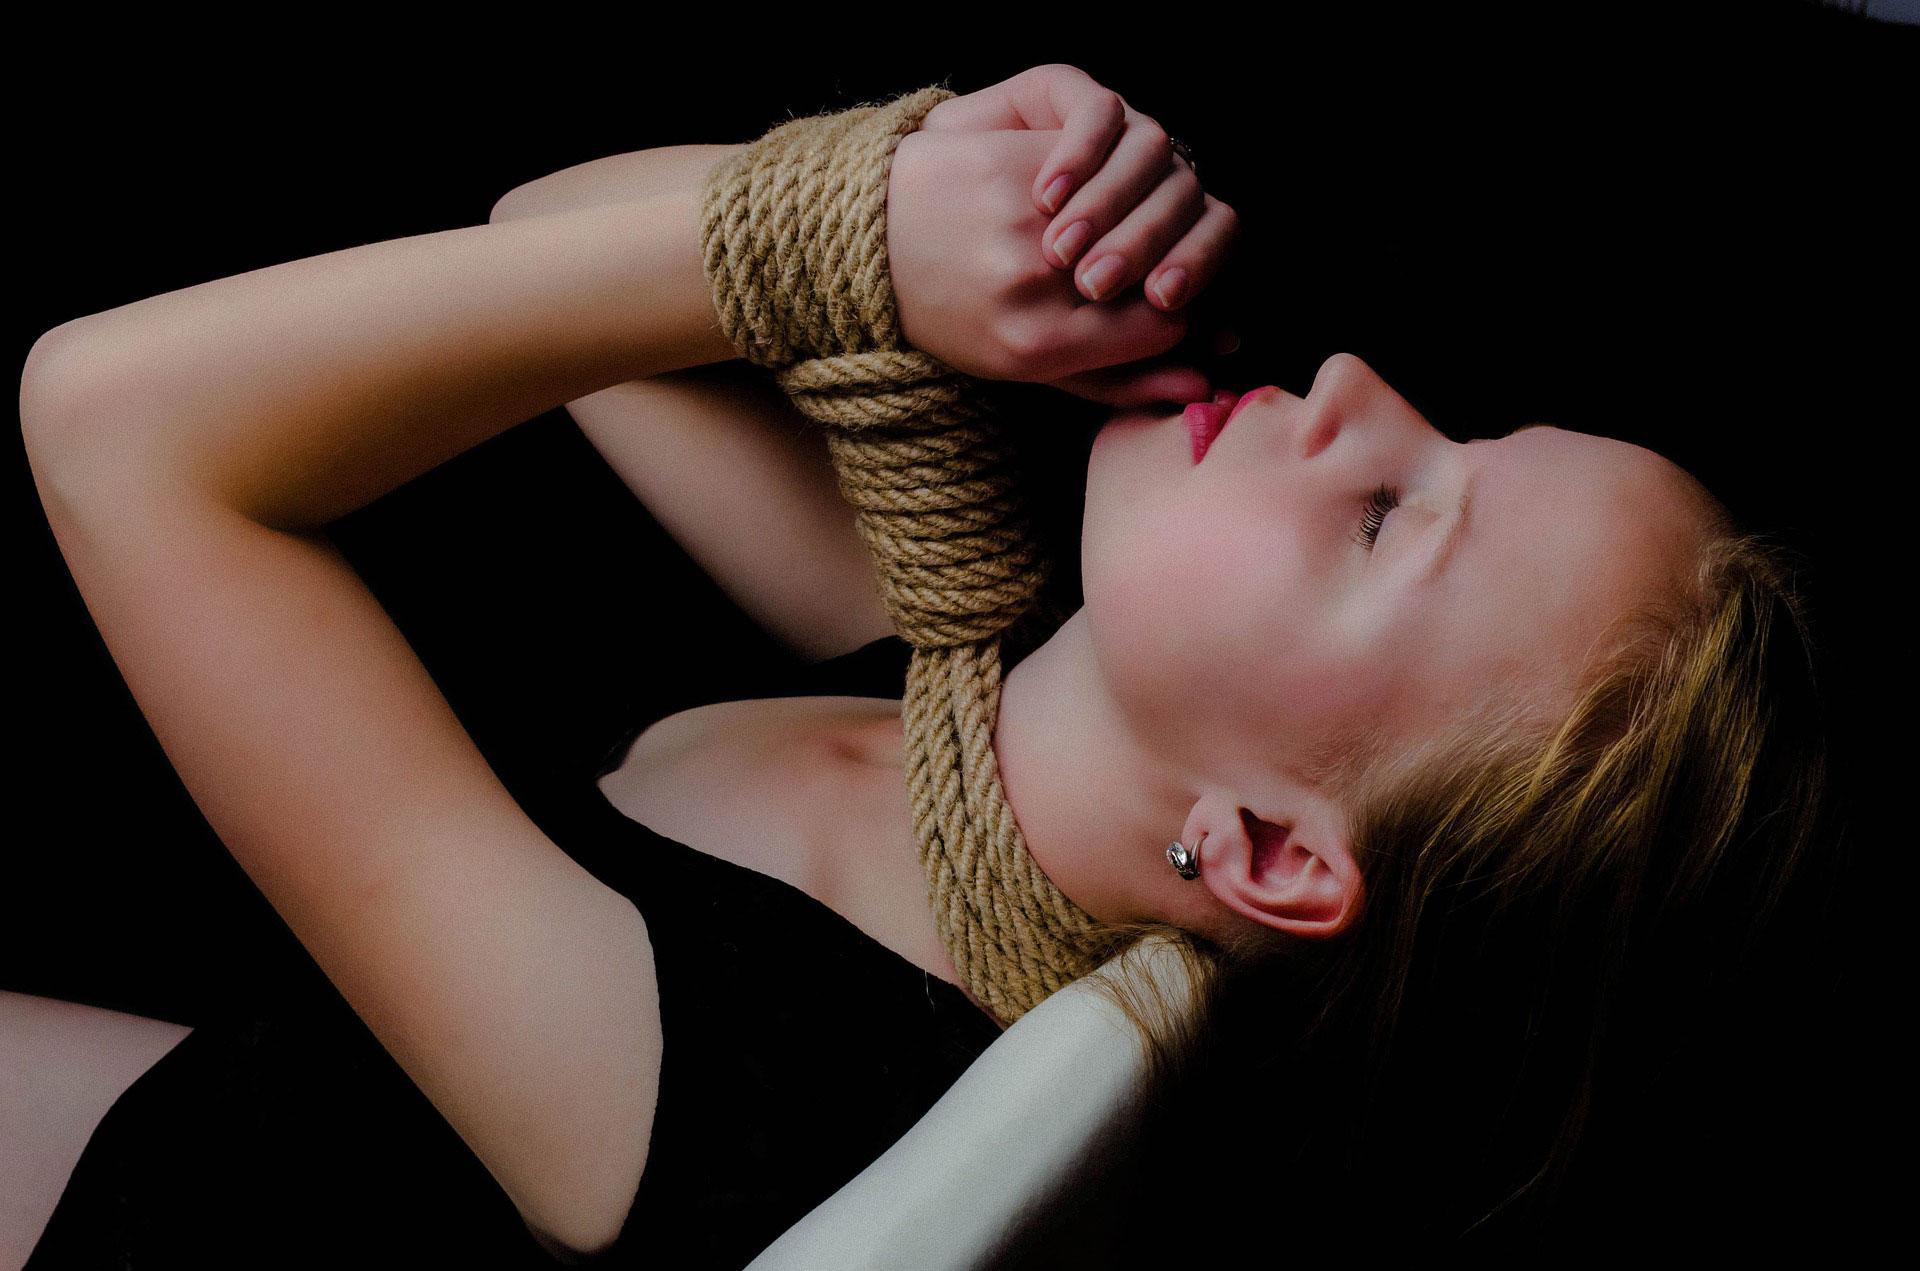 Cute girl is enjoying her ropes and layered nylons